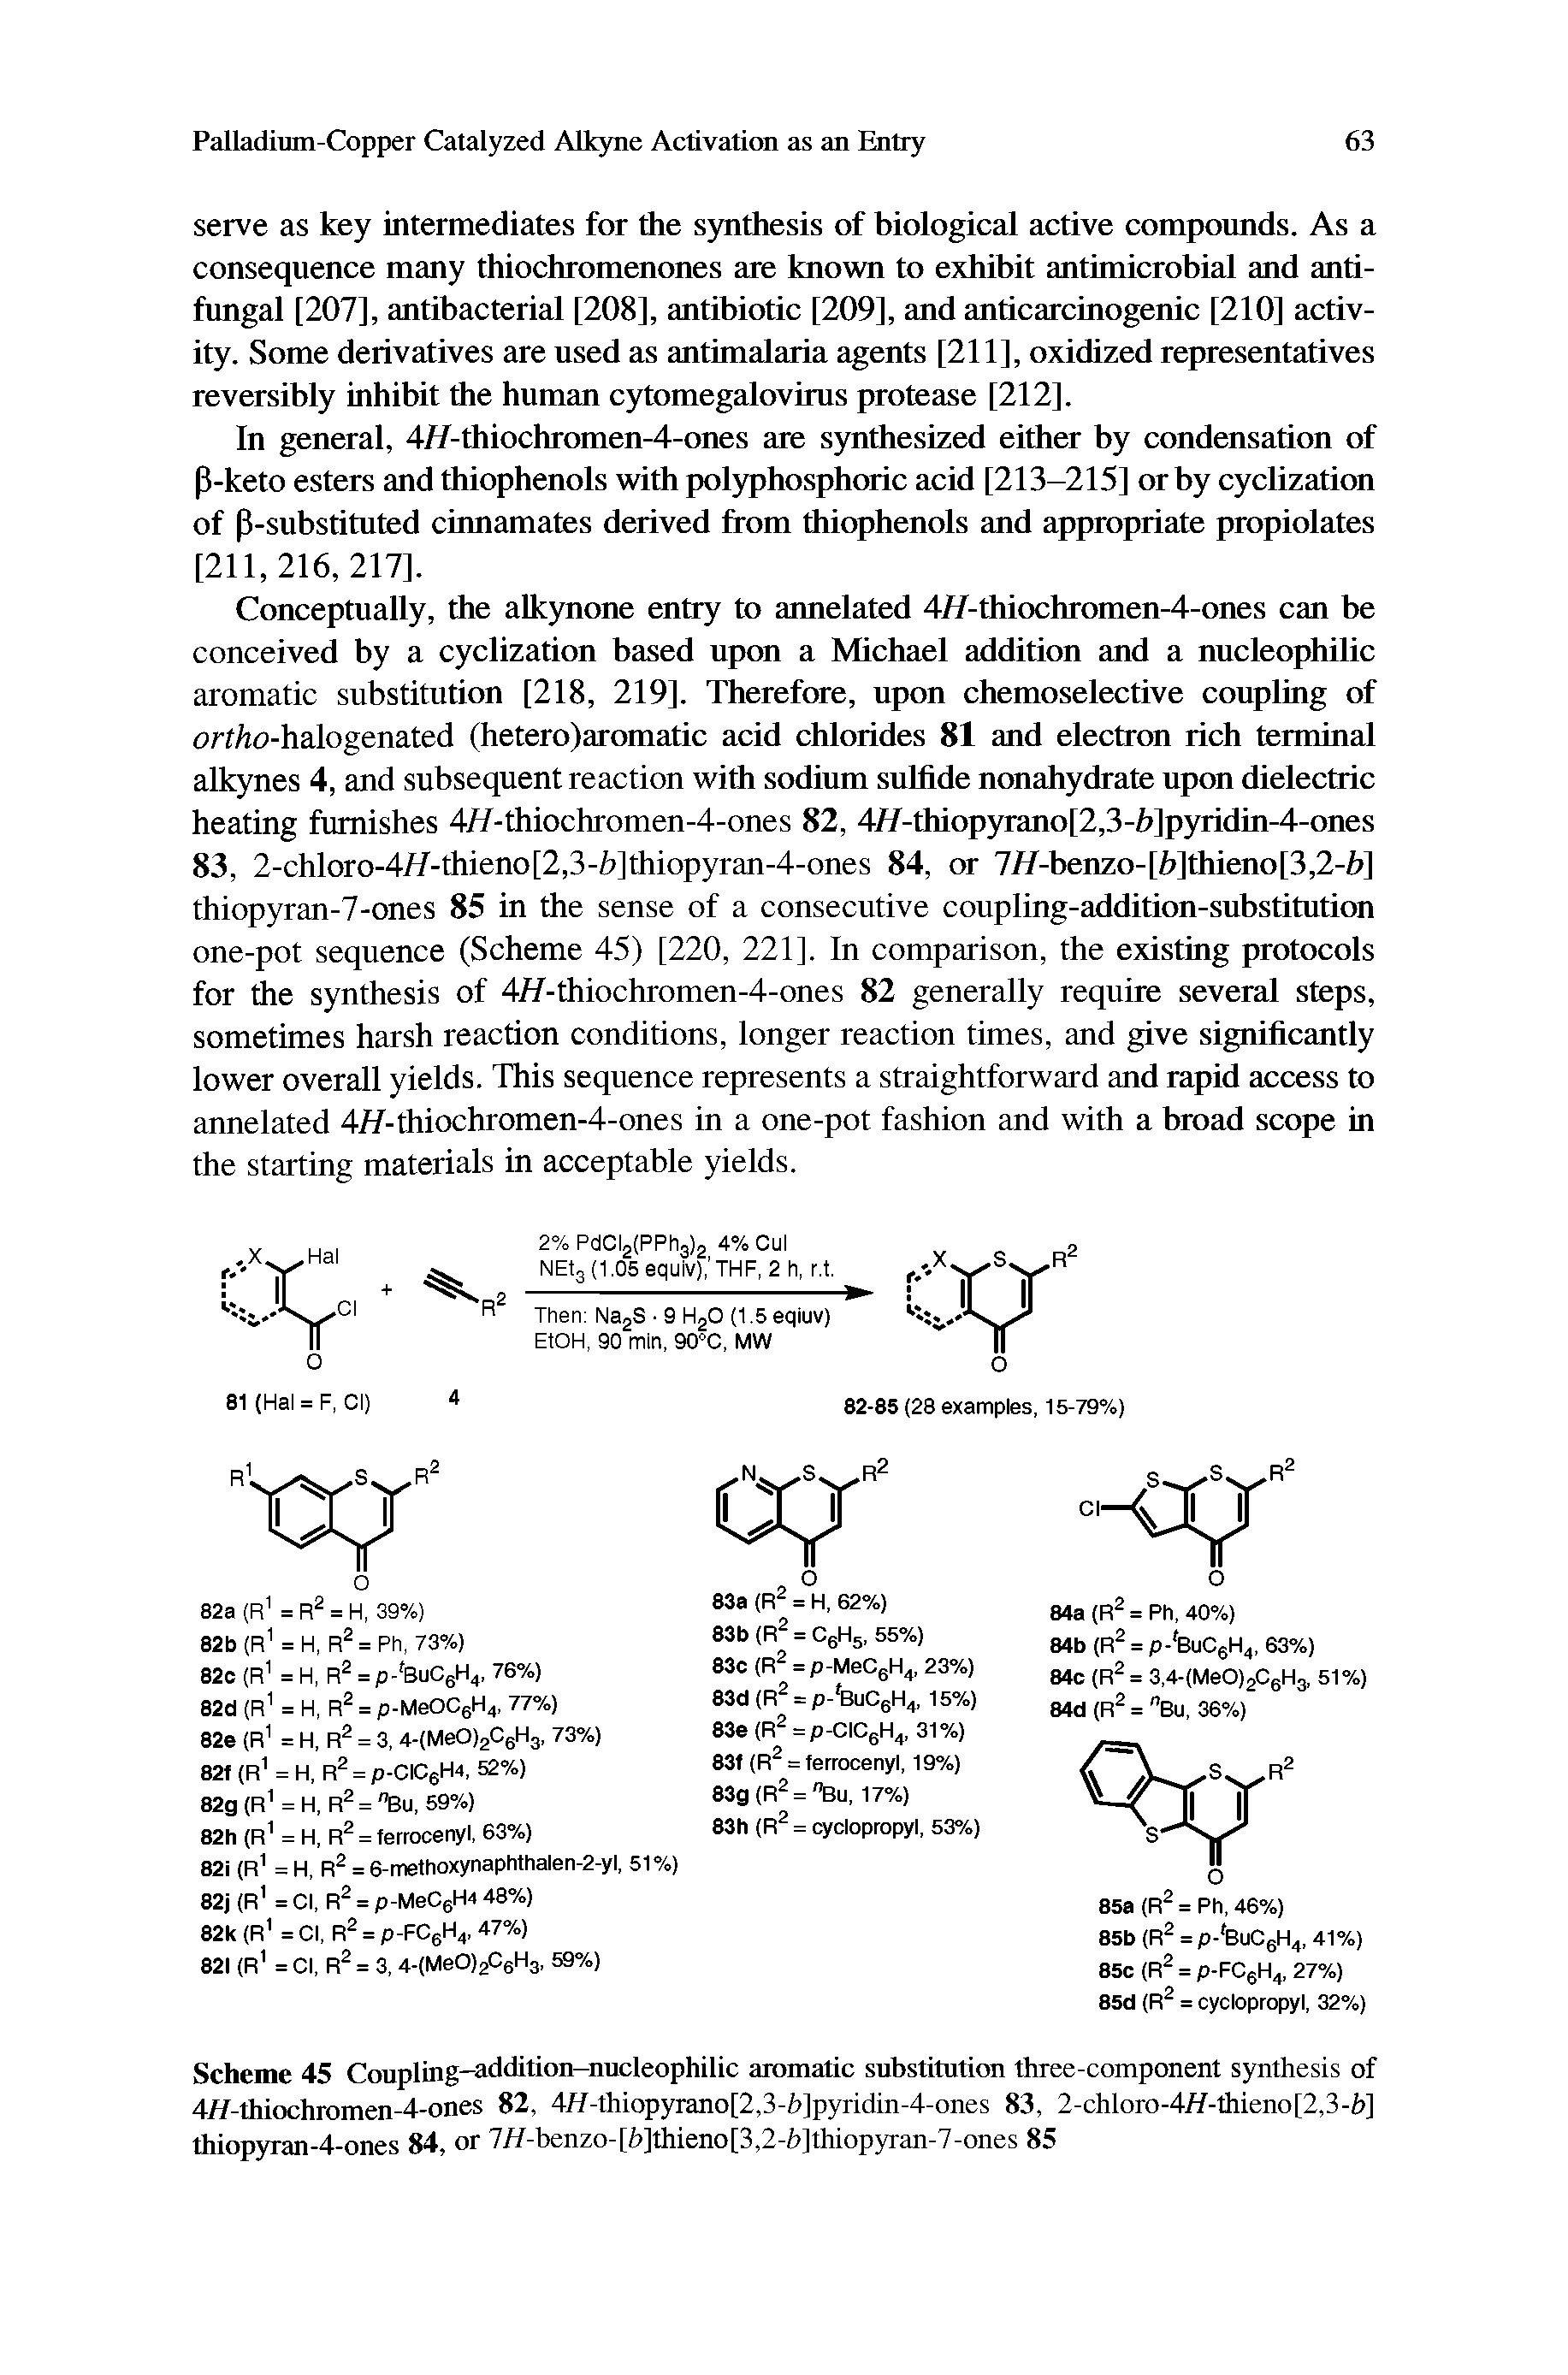 Scheme 45 Coupling-addition-nucleophilic aromatic substitution three-component synthesis of 4//-thiochromen-4-ones 82, 4/f-thiopyrano[2,3-i)]pyridin-4-ones 83, 2-chloro-4/f-thieno[2,3-b] thiopyran-4-ones 84, or 7//-benzo-[b]thieno[3,2-i)]thiopyran-7-ones 85...